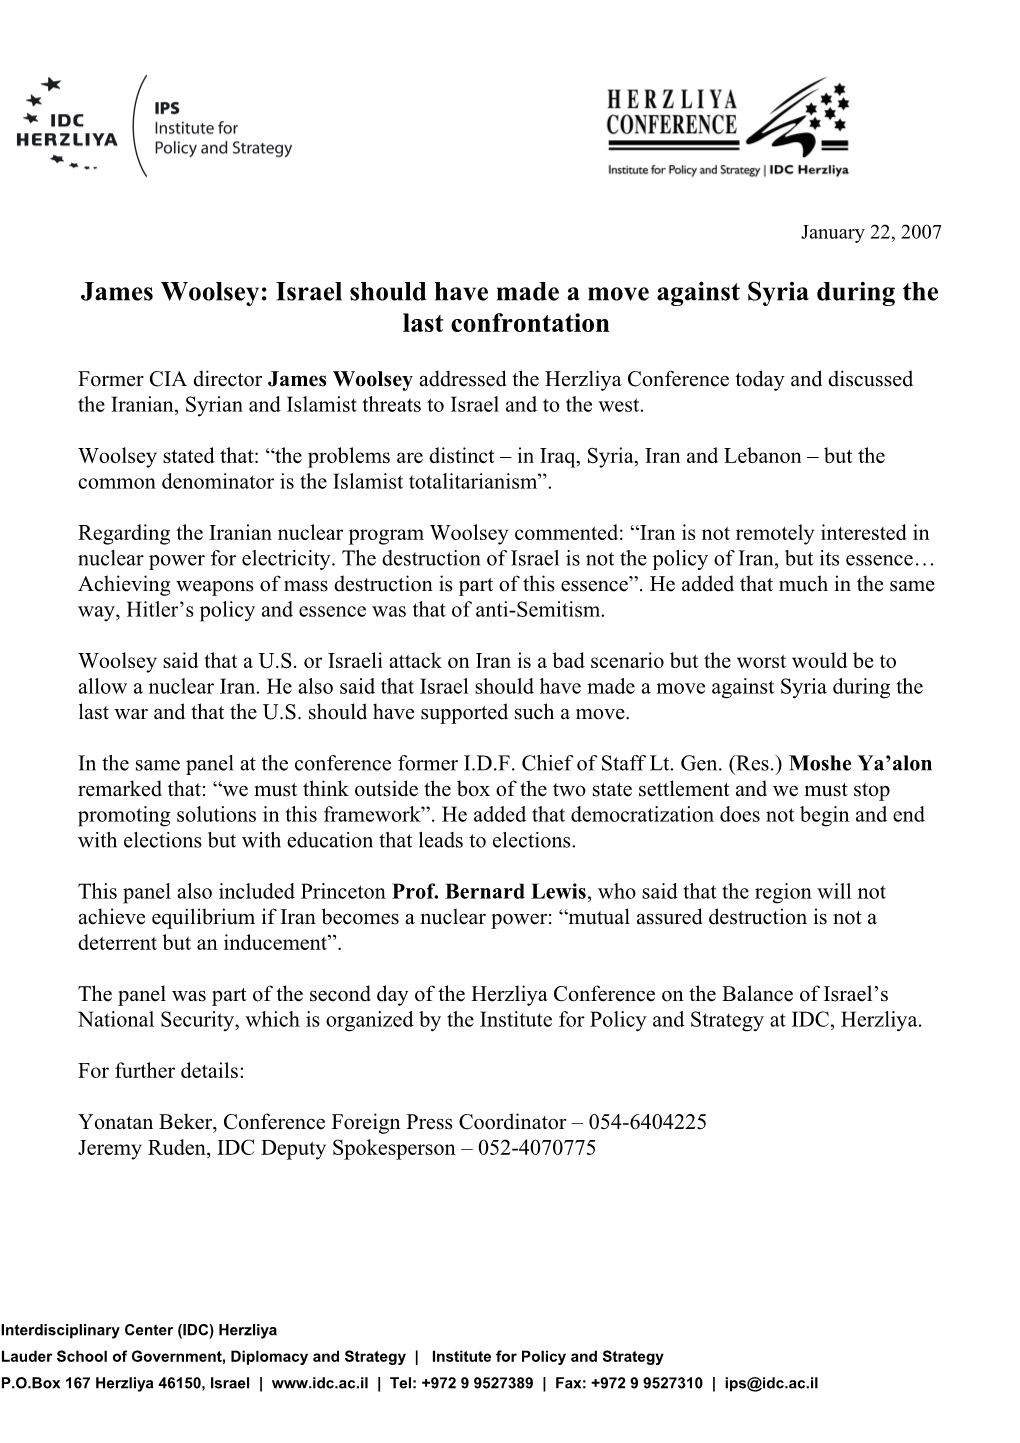 James Woolsey: Israel Should Have Made a Move Against Syria During the Last Confrontation